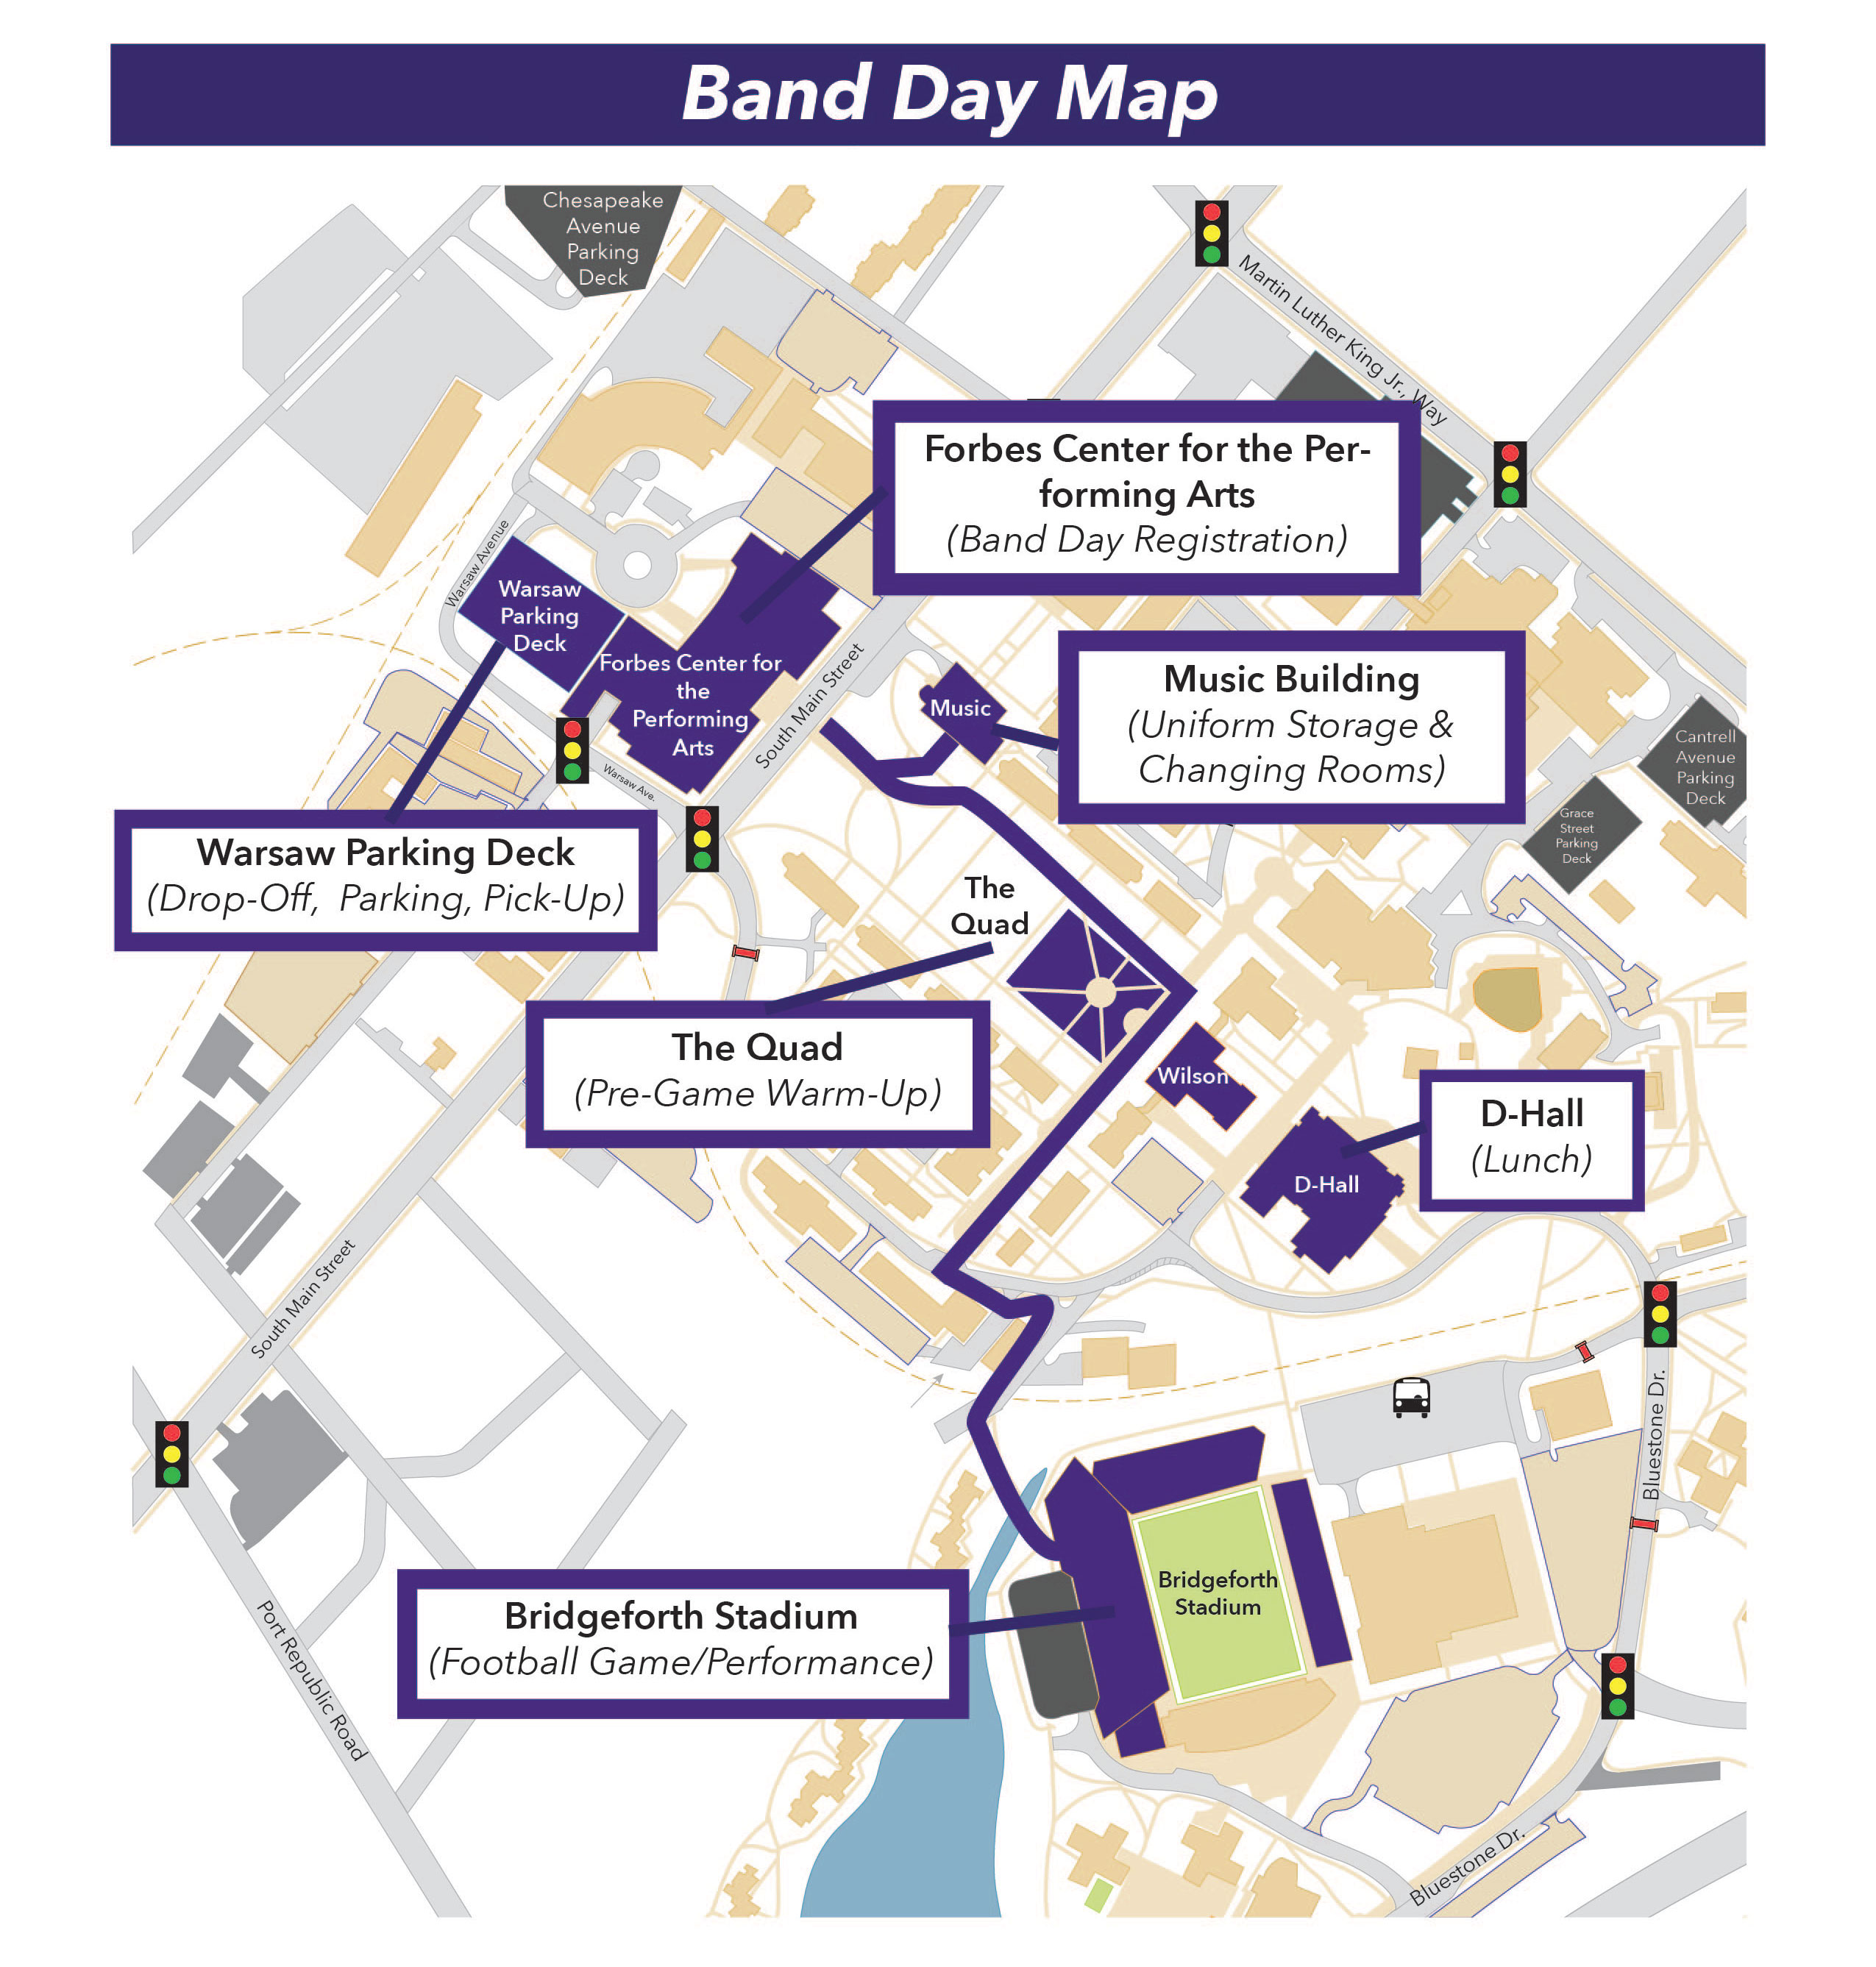 Band-Day-Map-2019-01.jpg